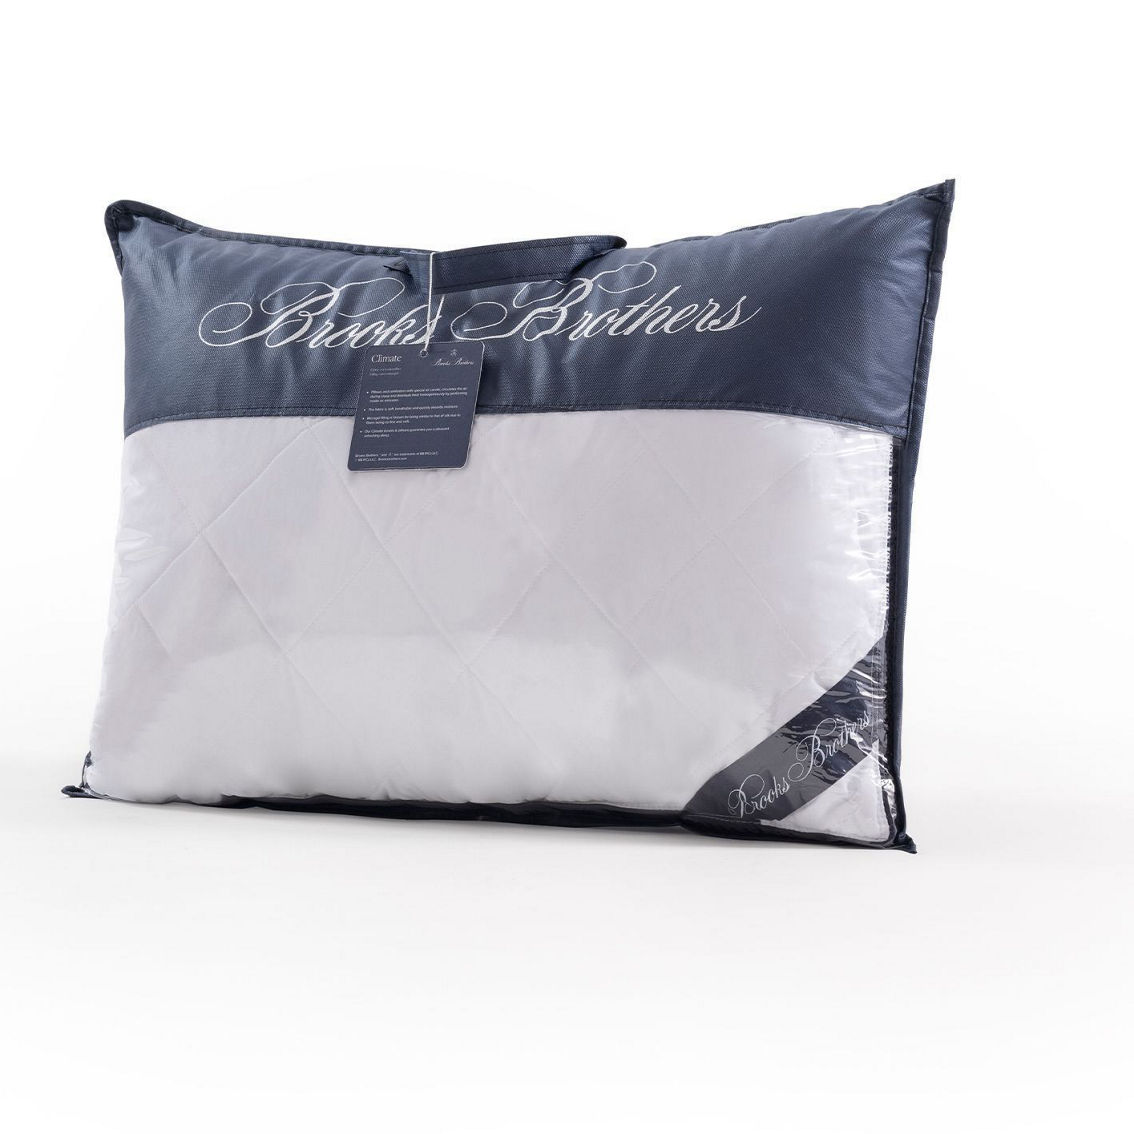 Brooks Brothers Climate Pillow - Image 3 of 5